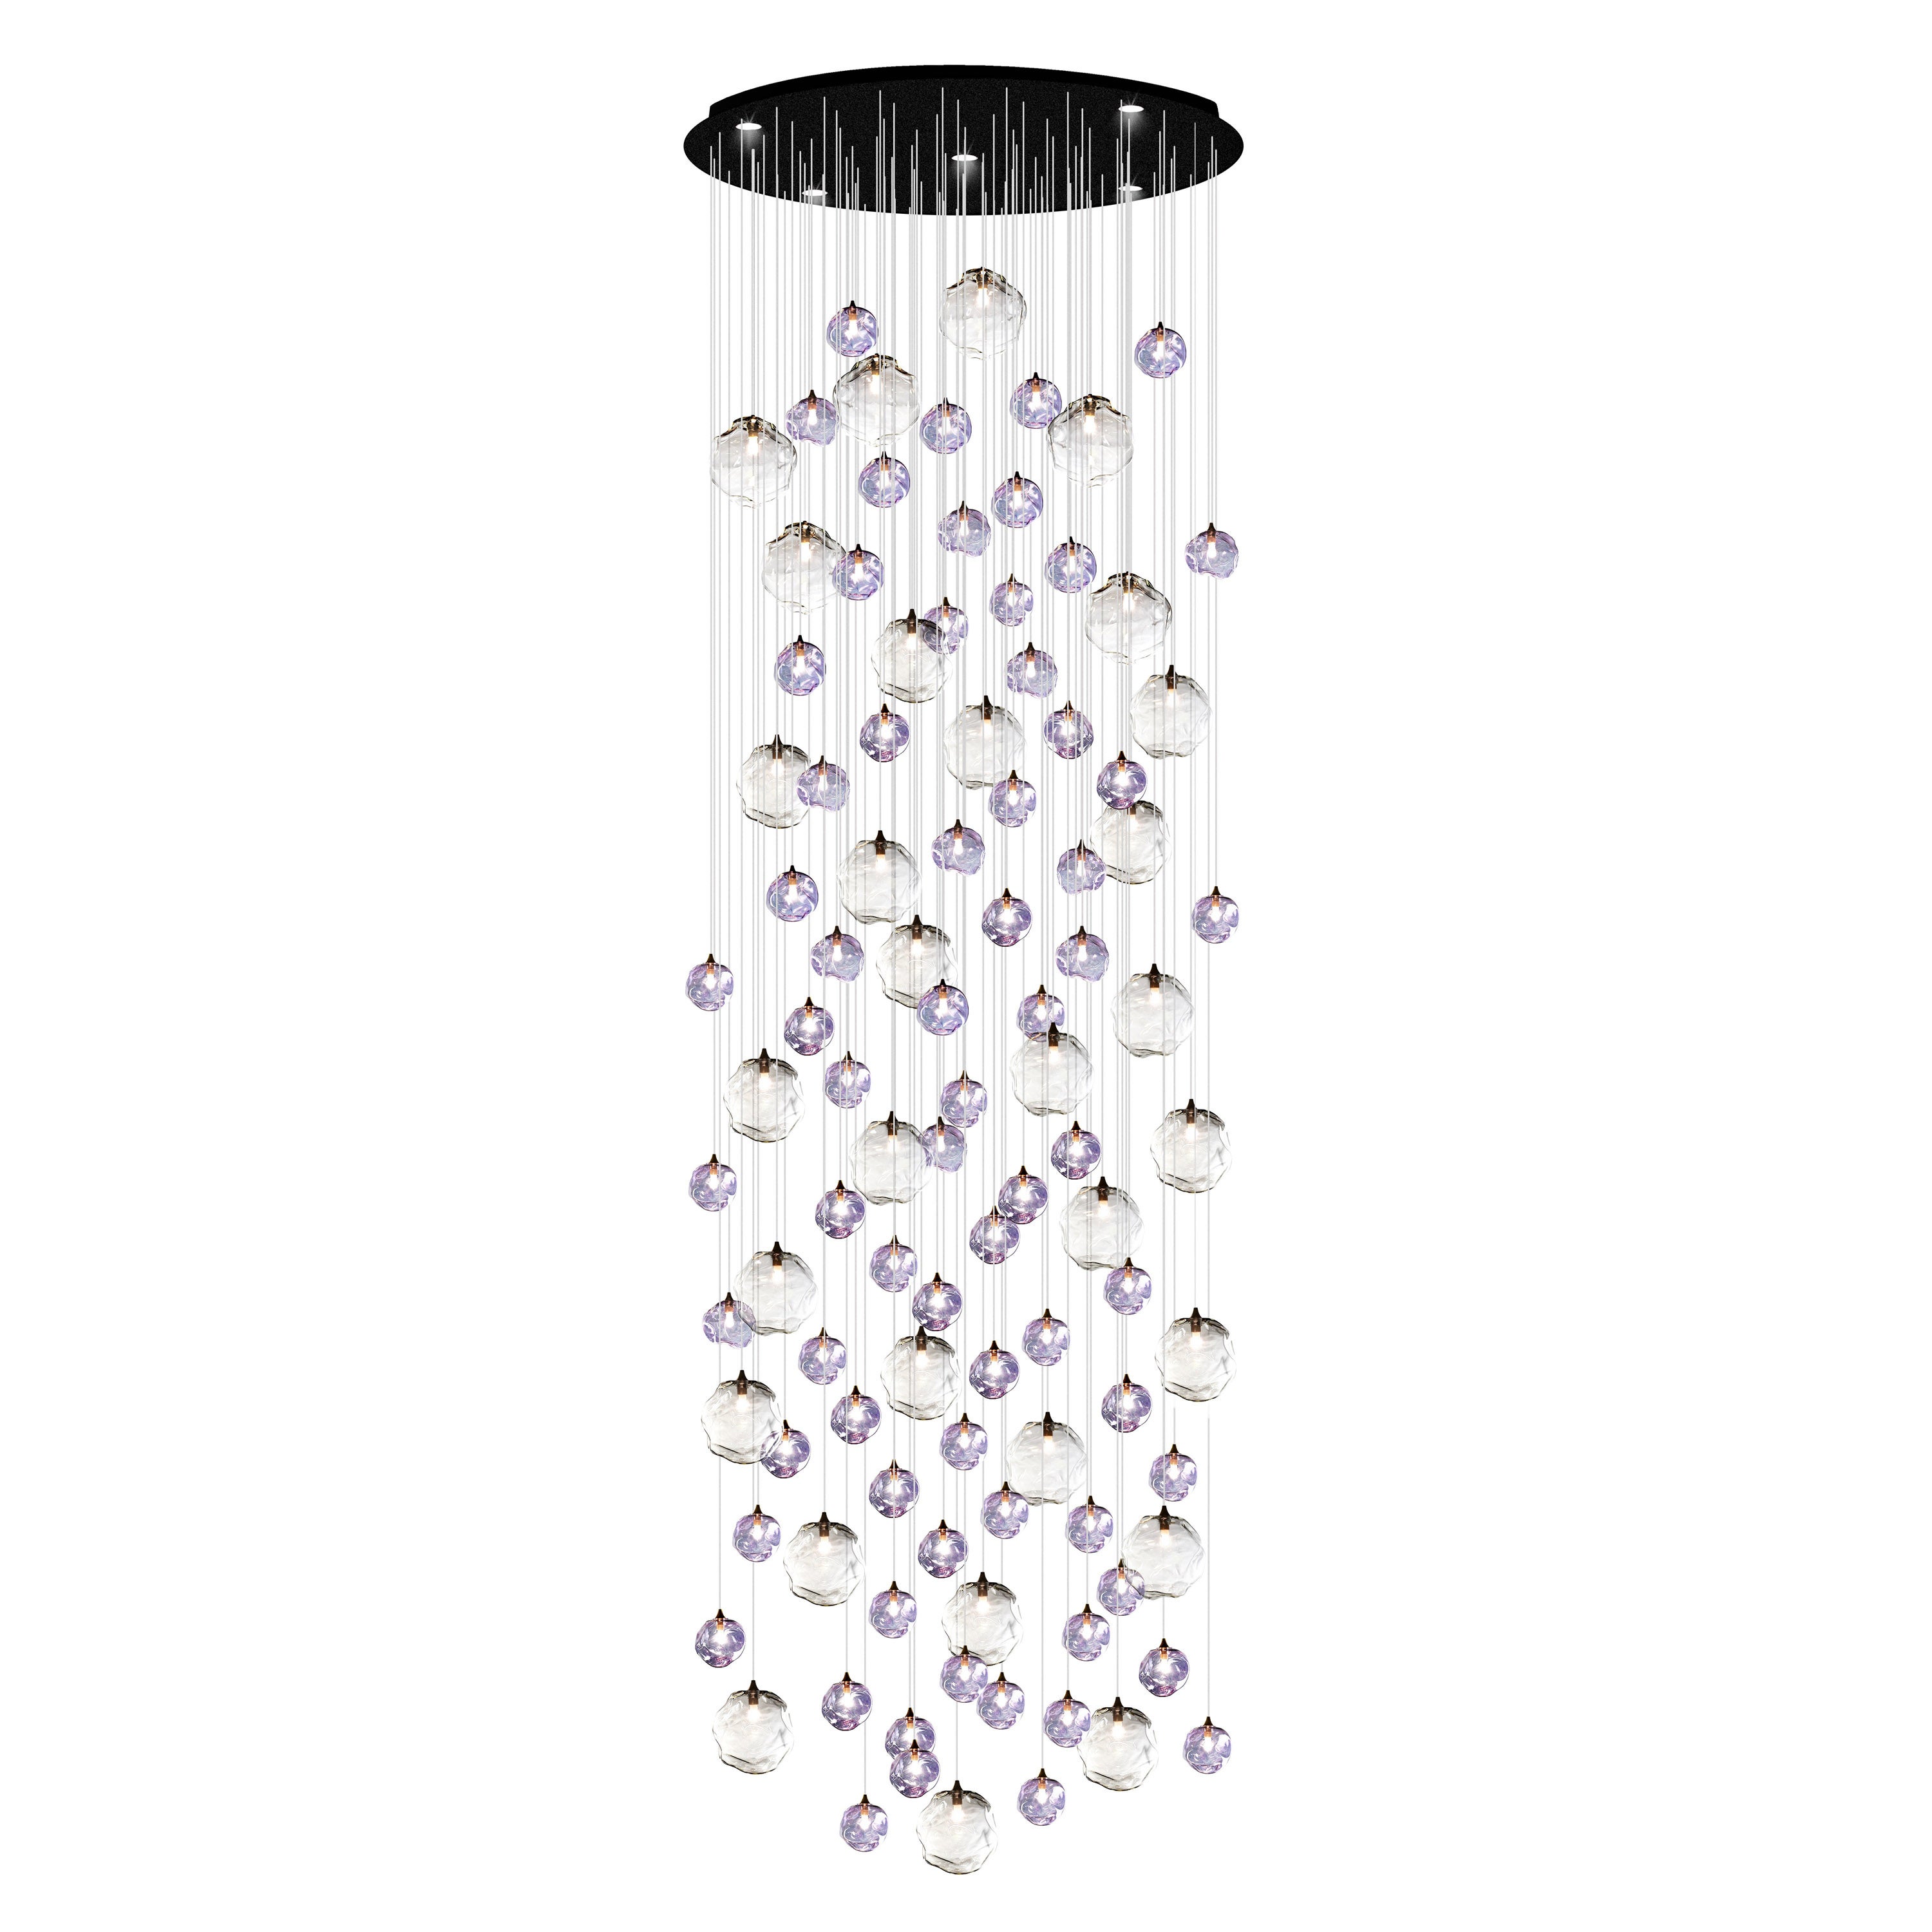 Palazzo Ametista Modern Chandelier 100 Art Glass Pendants in Clear & Violet, LED For Sale